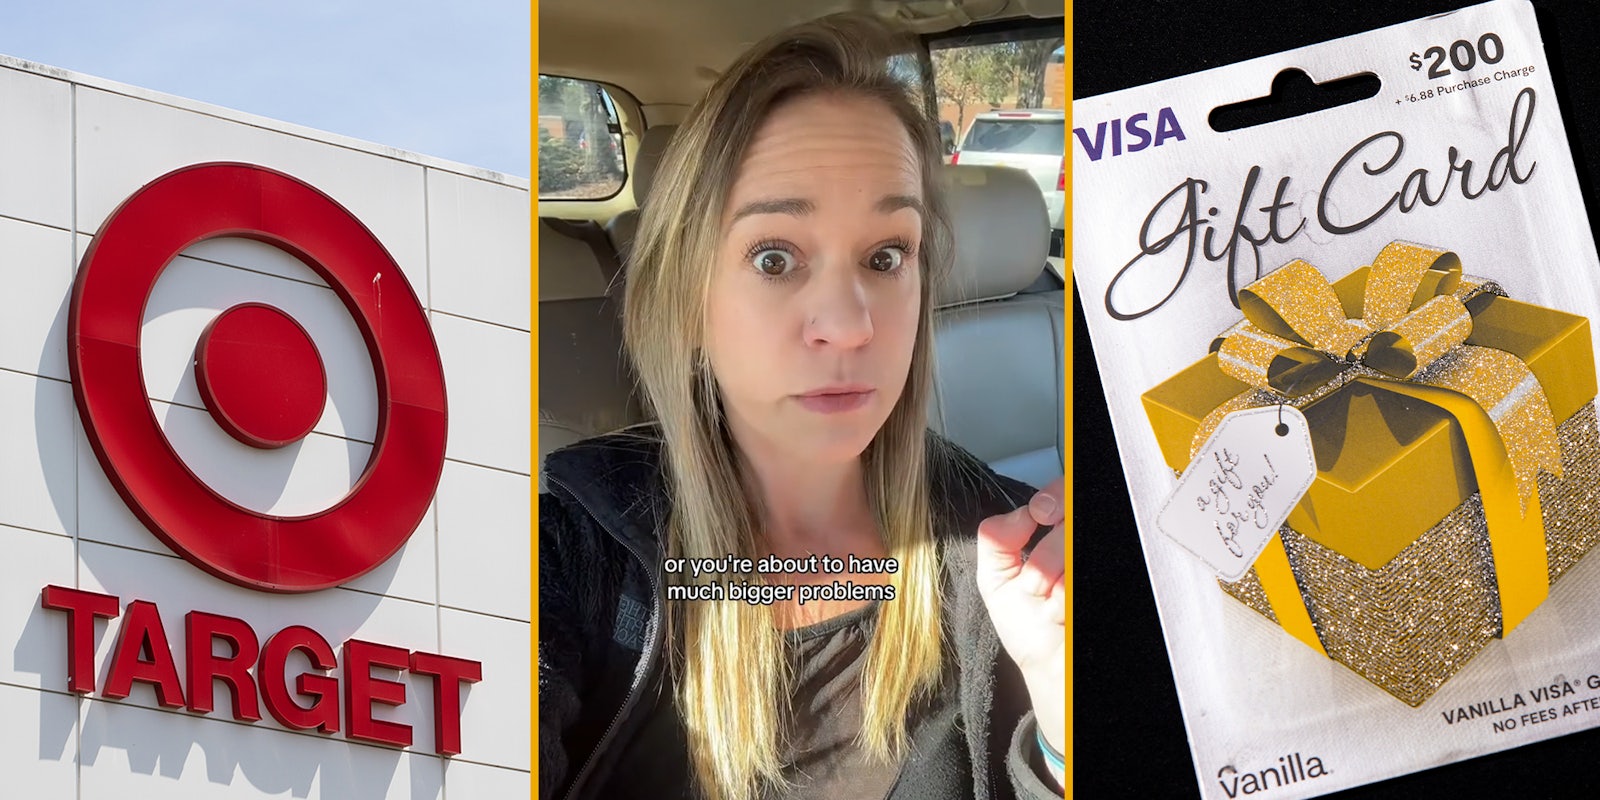 50 Target Gift Cards Bought for Charity Were Empty, Shopper Says